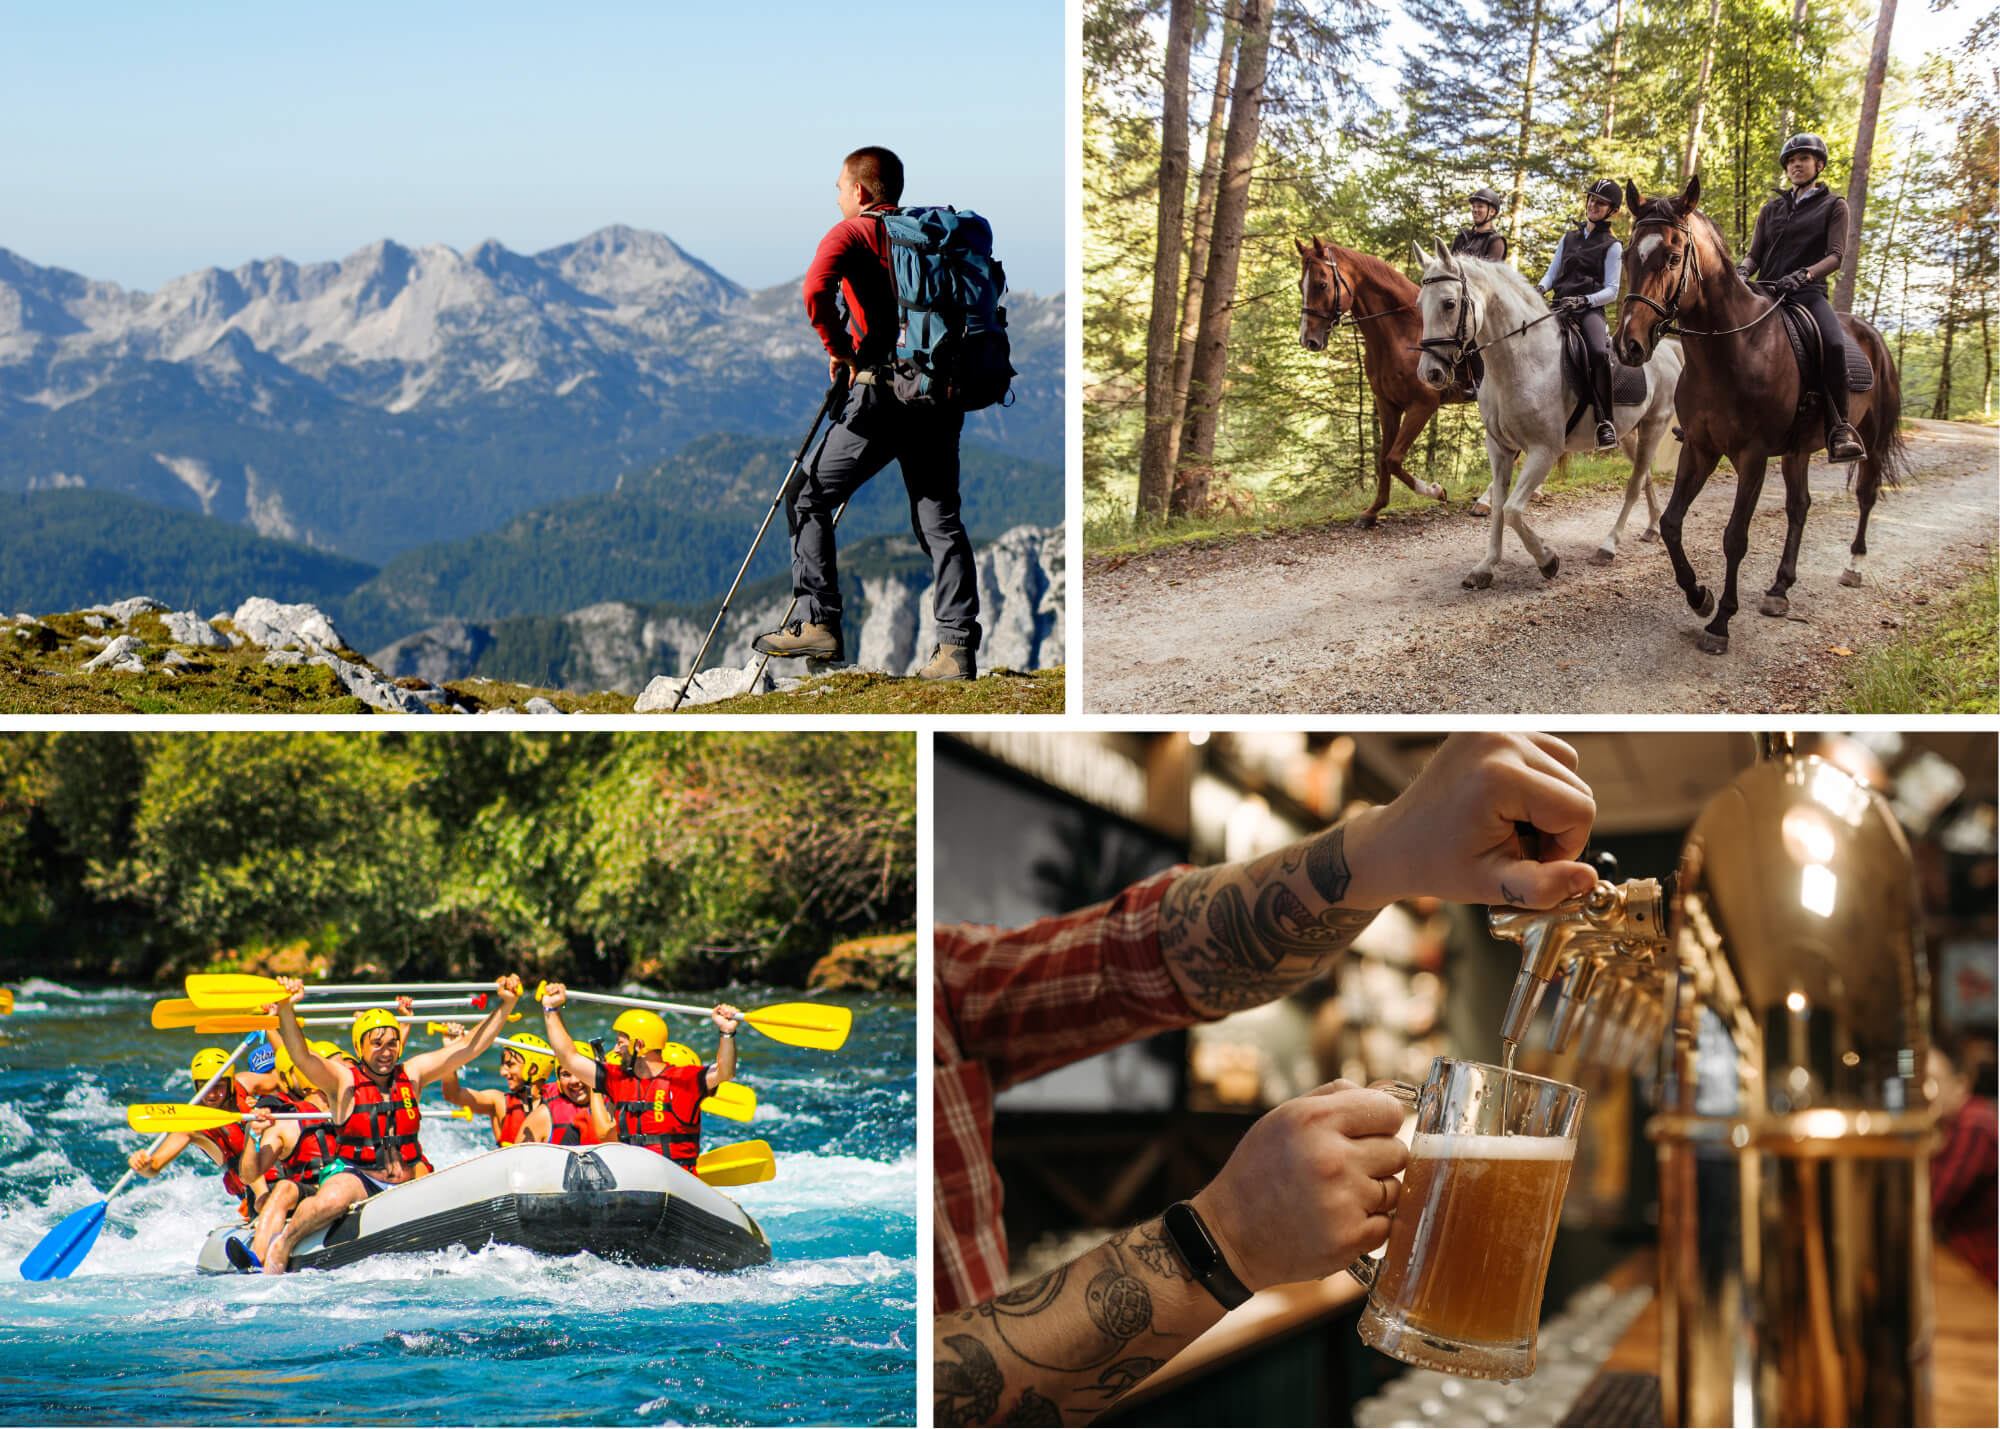 Colorado daytime activities and adventures, from hiking to whitewater rafting, horseback riding to brewery hopping